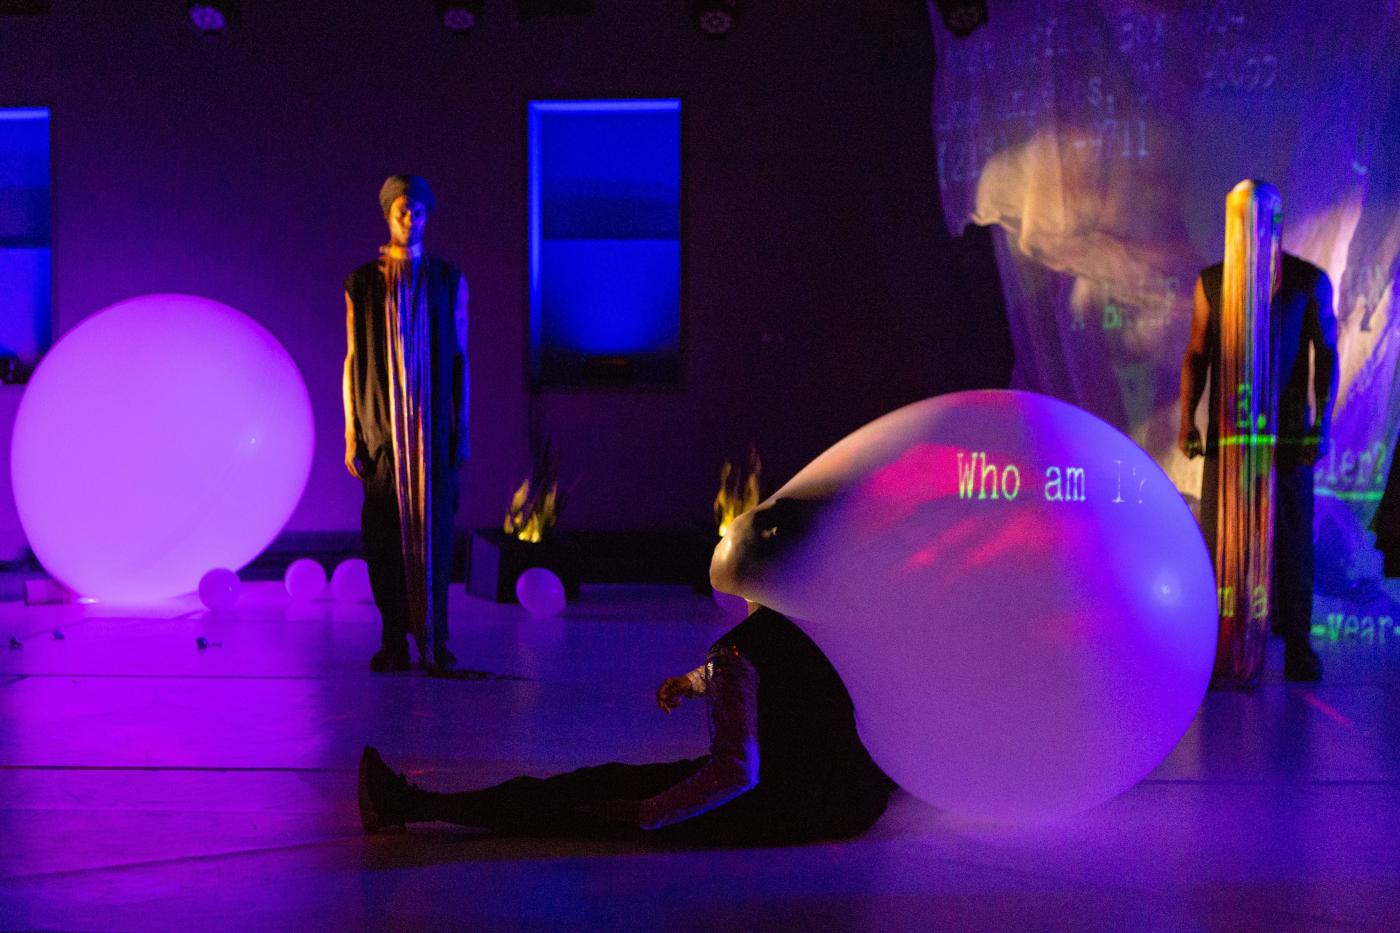 In a gallery, a dancer (with a mask that inflates like a balloon in the back) sits on the ground in front of another dancer who stands (and wears a long tassled mask).